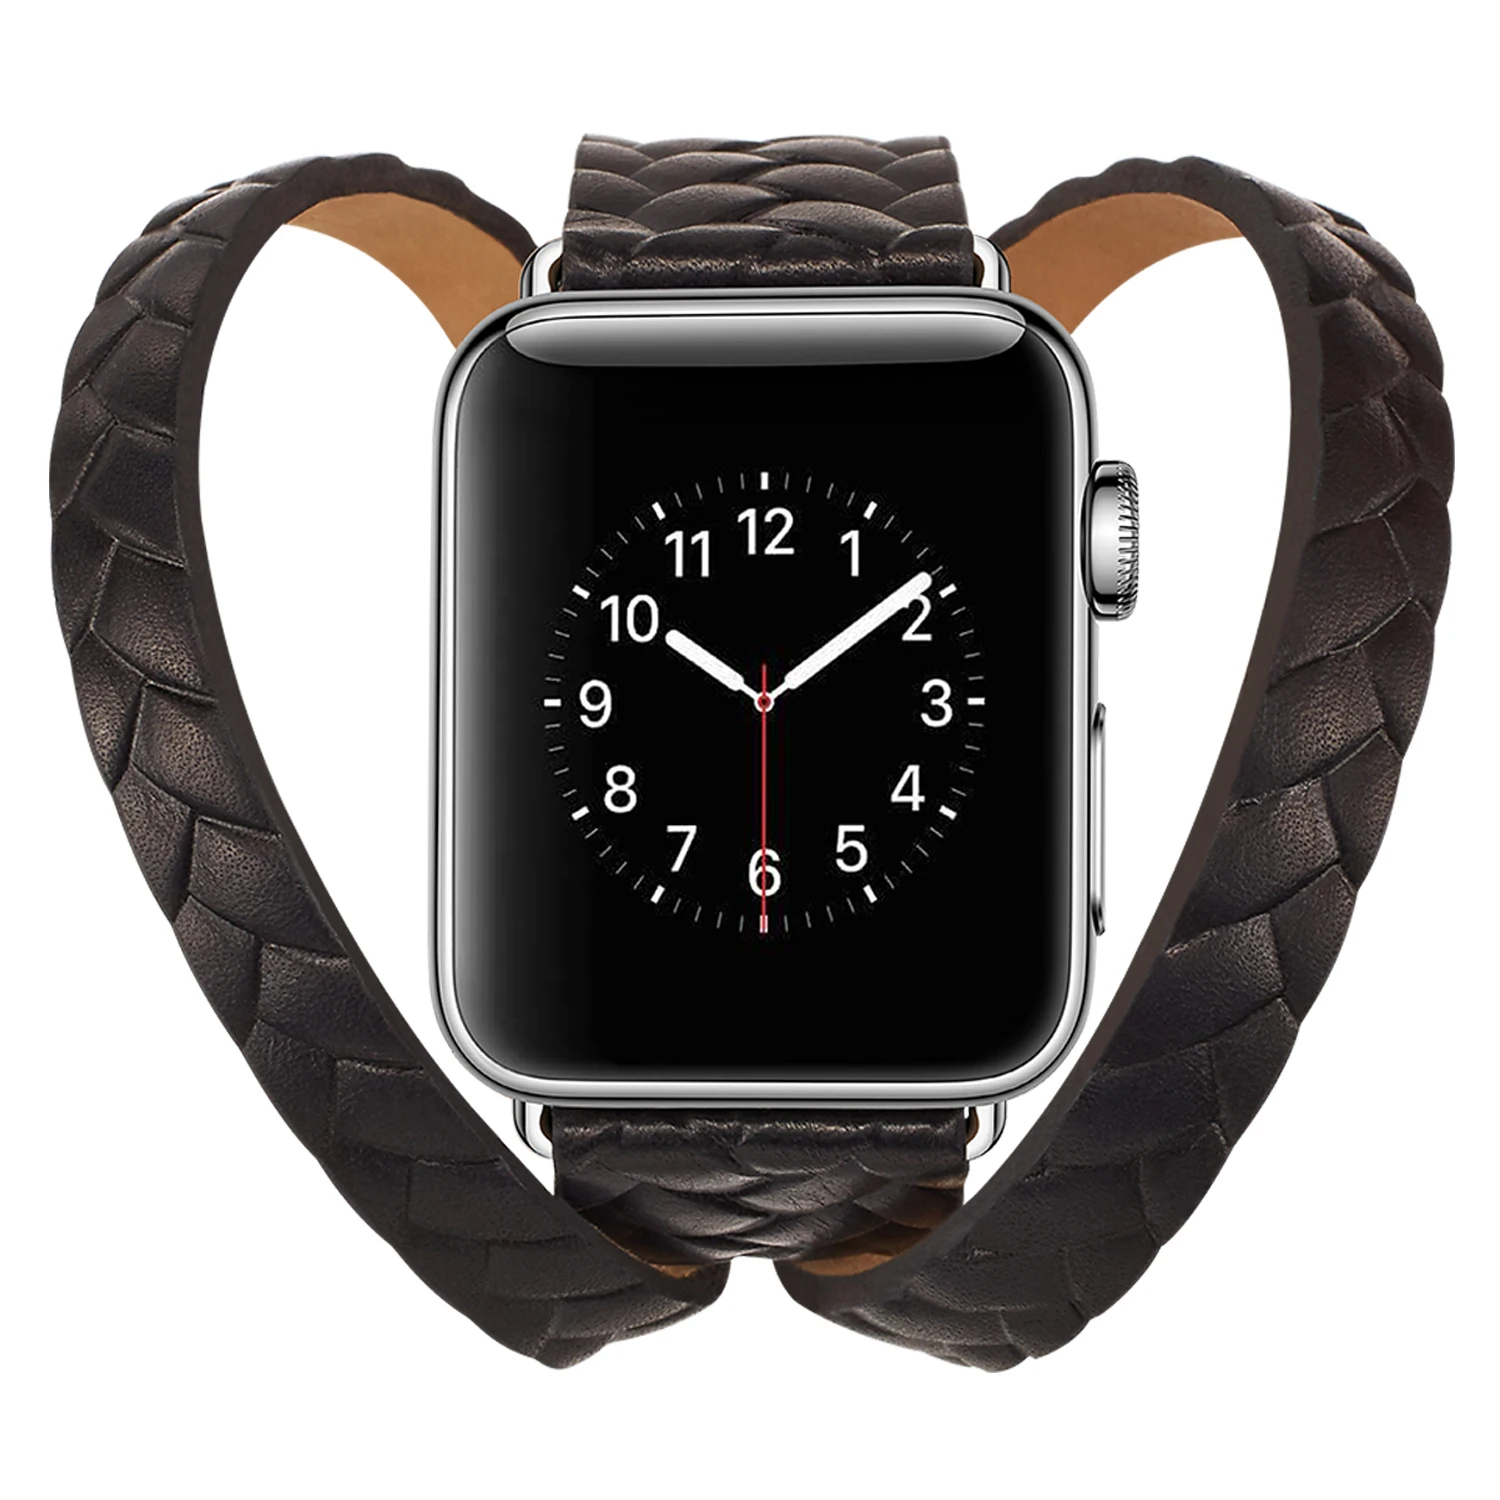 

Genuine Cow Leather Double Tour Embossed Woven Strap Crown Pattern Bracelet watchband for apple watch Series 1/2/3/4 38/42mm